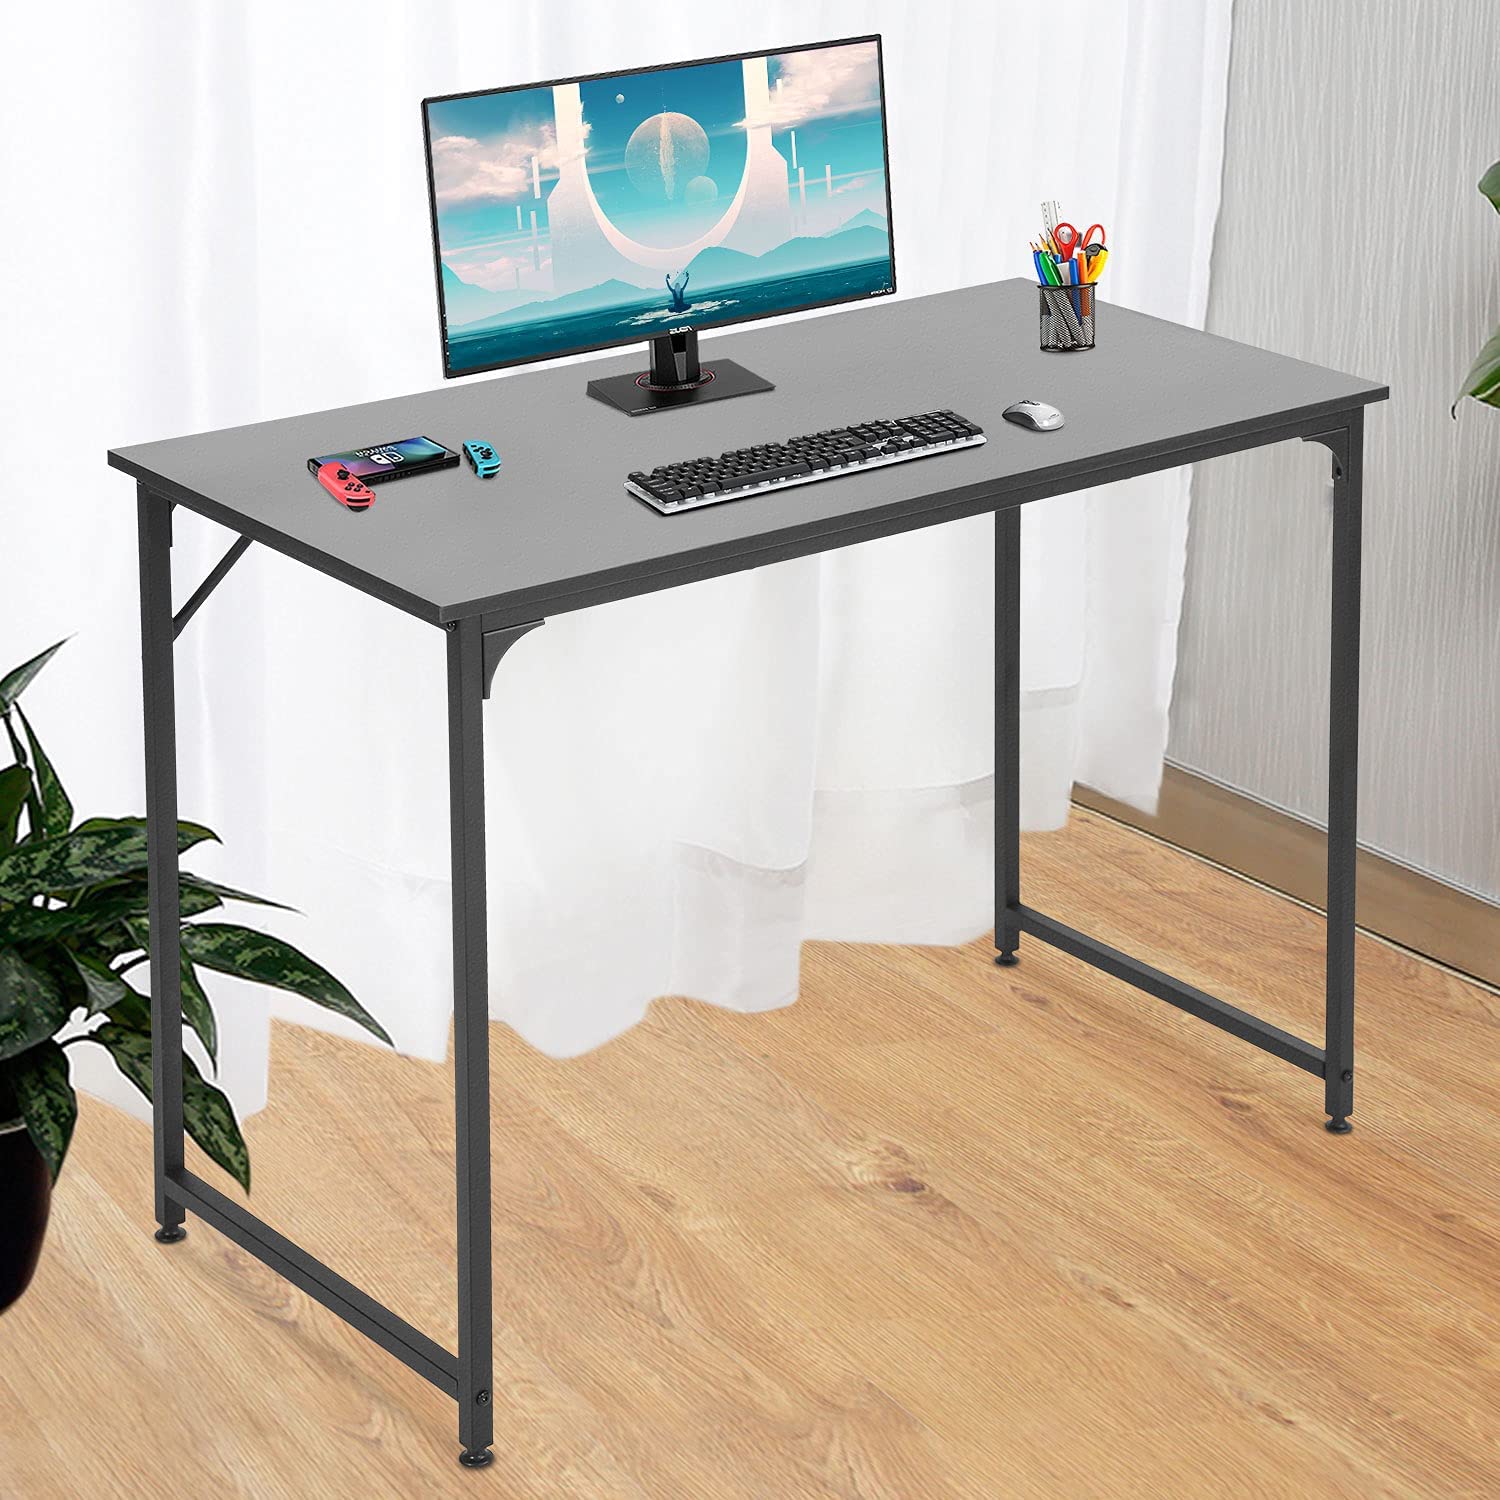 PayLessHere 39 inch Computer Desk Modern Writing Desk, Simple Study Table, Industrial Office Desk, Sturdy Laptop Table for Home Office, Black - image 1 of 7